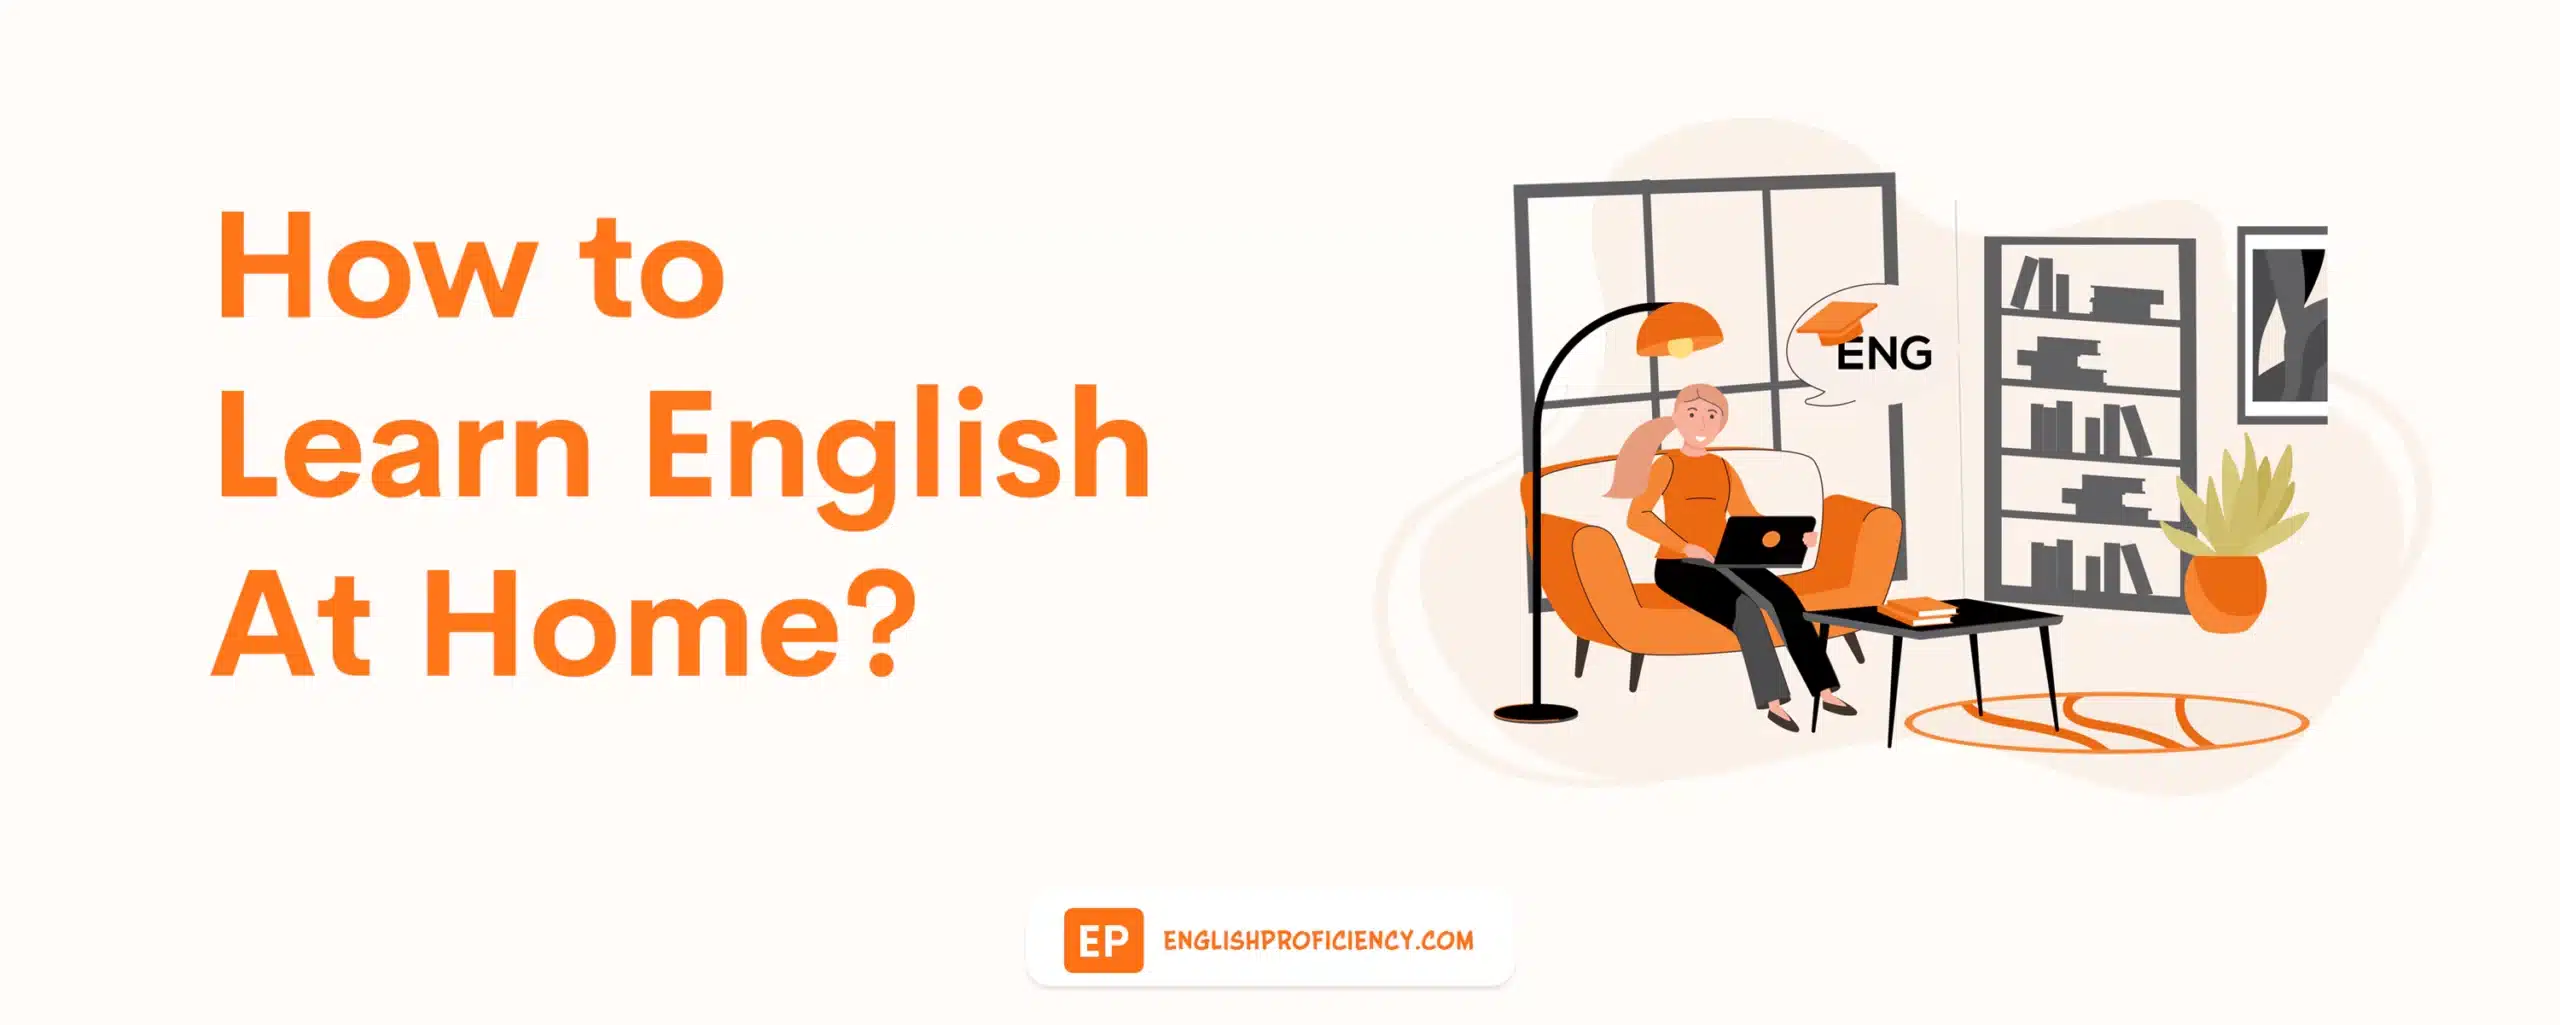 How to Learn English At Home